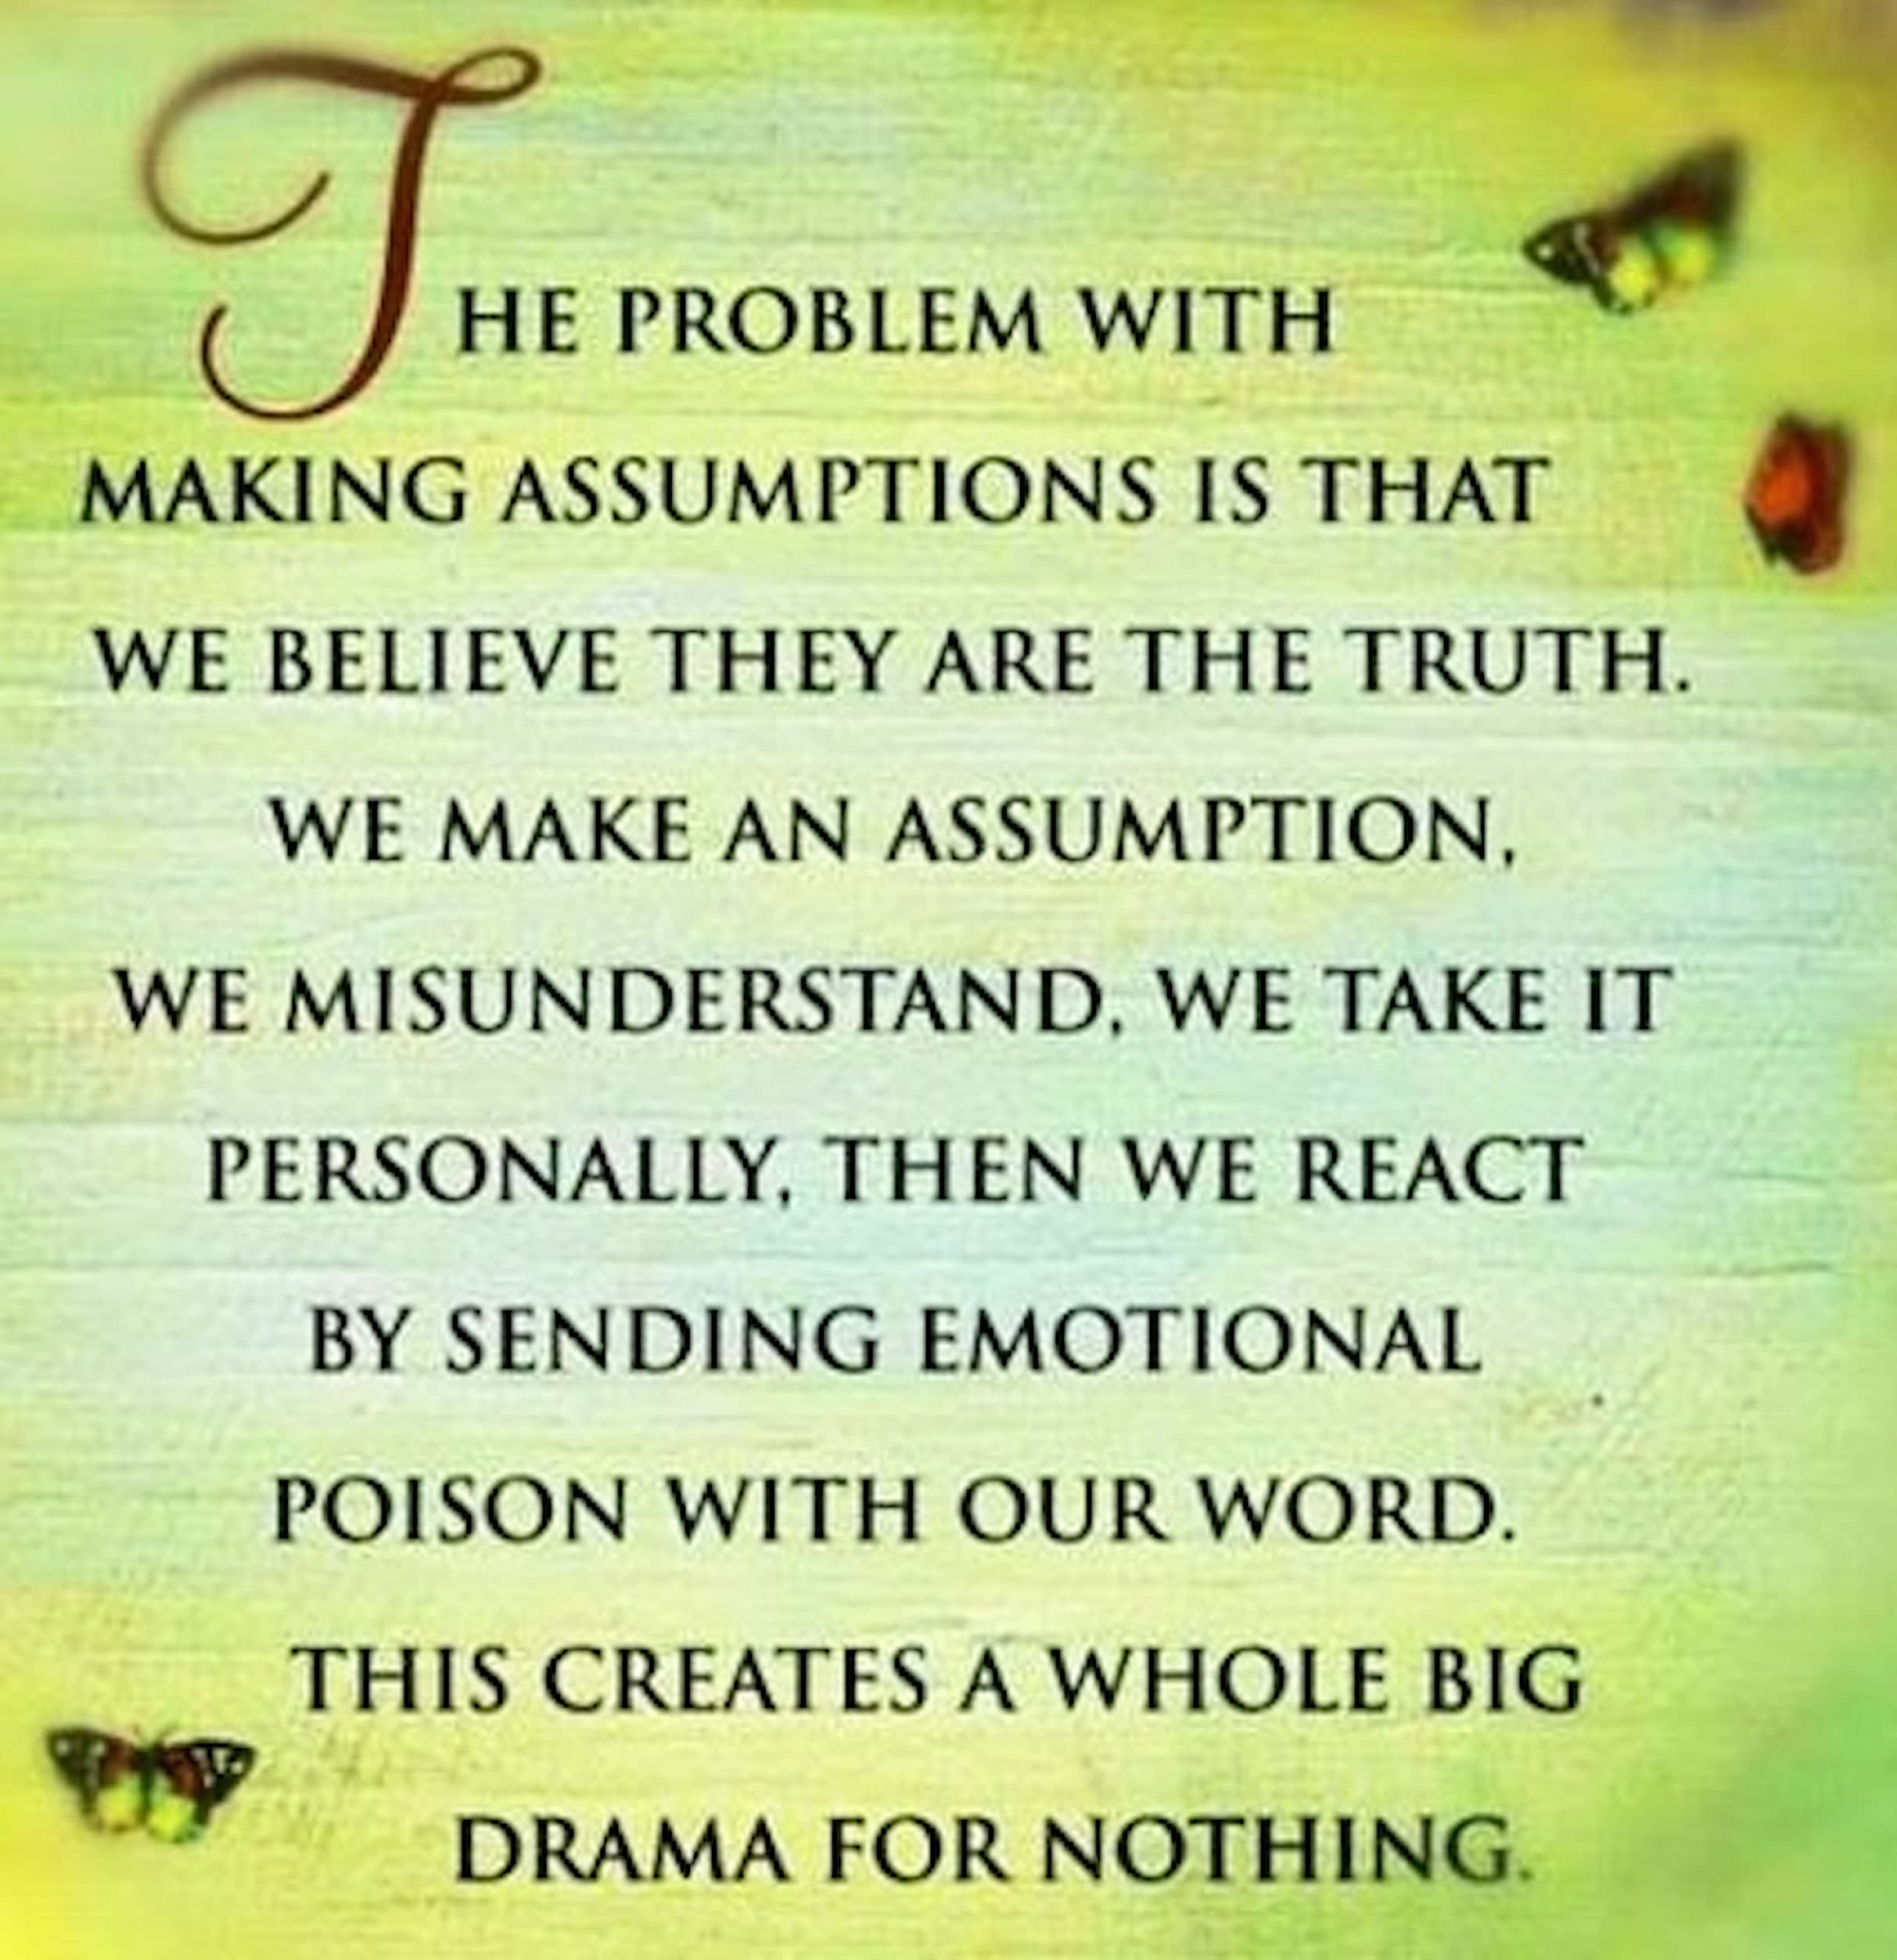 The problem with making assumptions is that we believe they are the truth! We invent a whole story that's only truth for us, but we believe it...